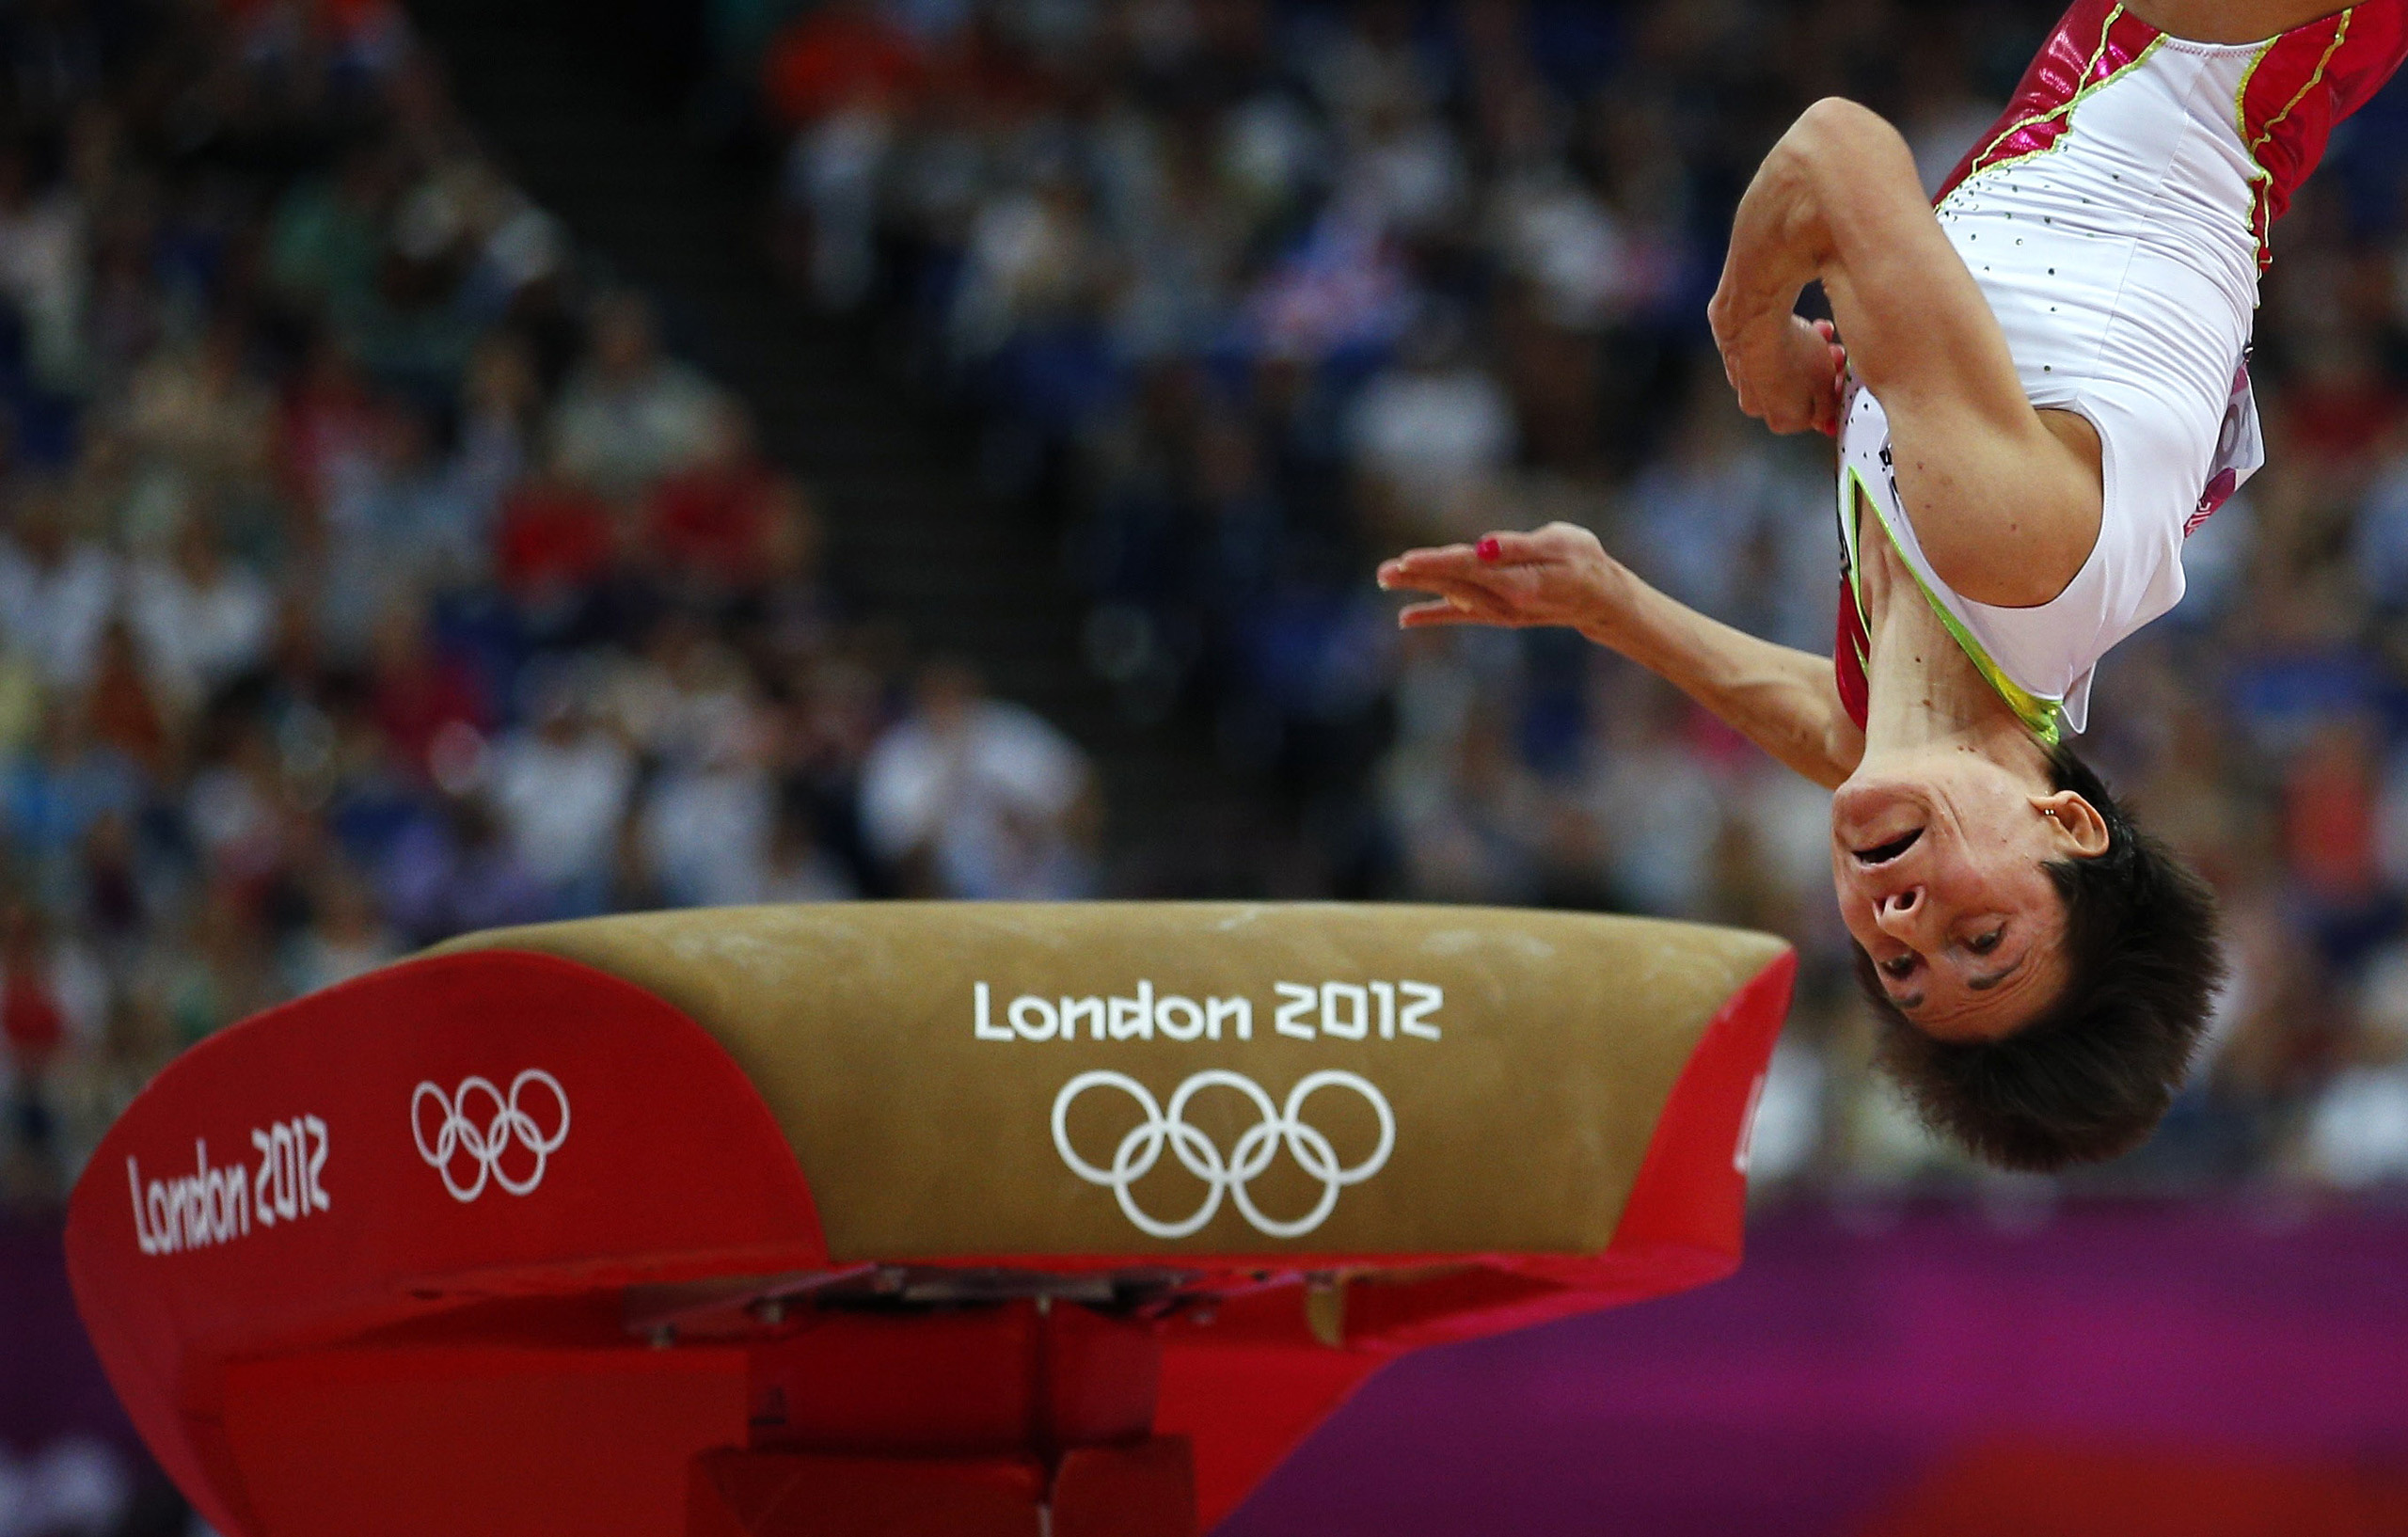 Oksana Chusovitina, Gymnastics, UzbekistanAt 41, she’s the oldest female Olympic gymnast ever, and she has a team gold and an individual silver medal to show for her six appearances at the Games. Her best chance for more hardware will be in the vault.